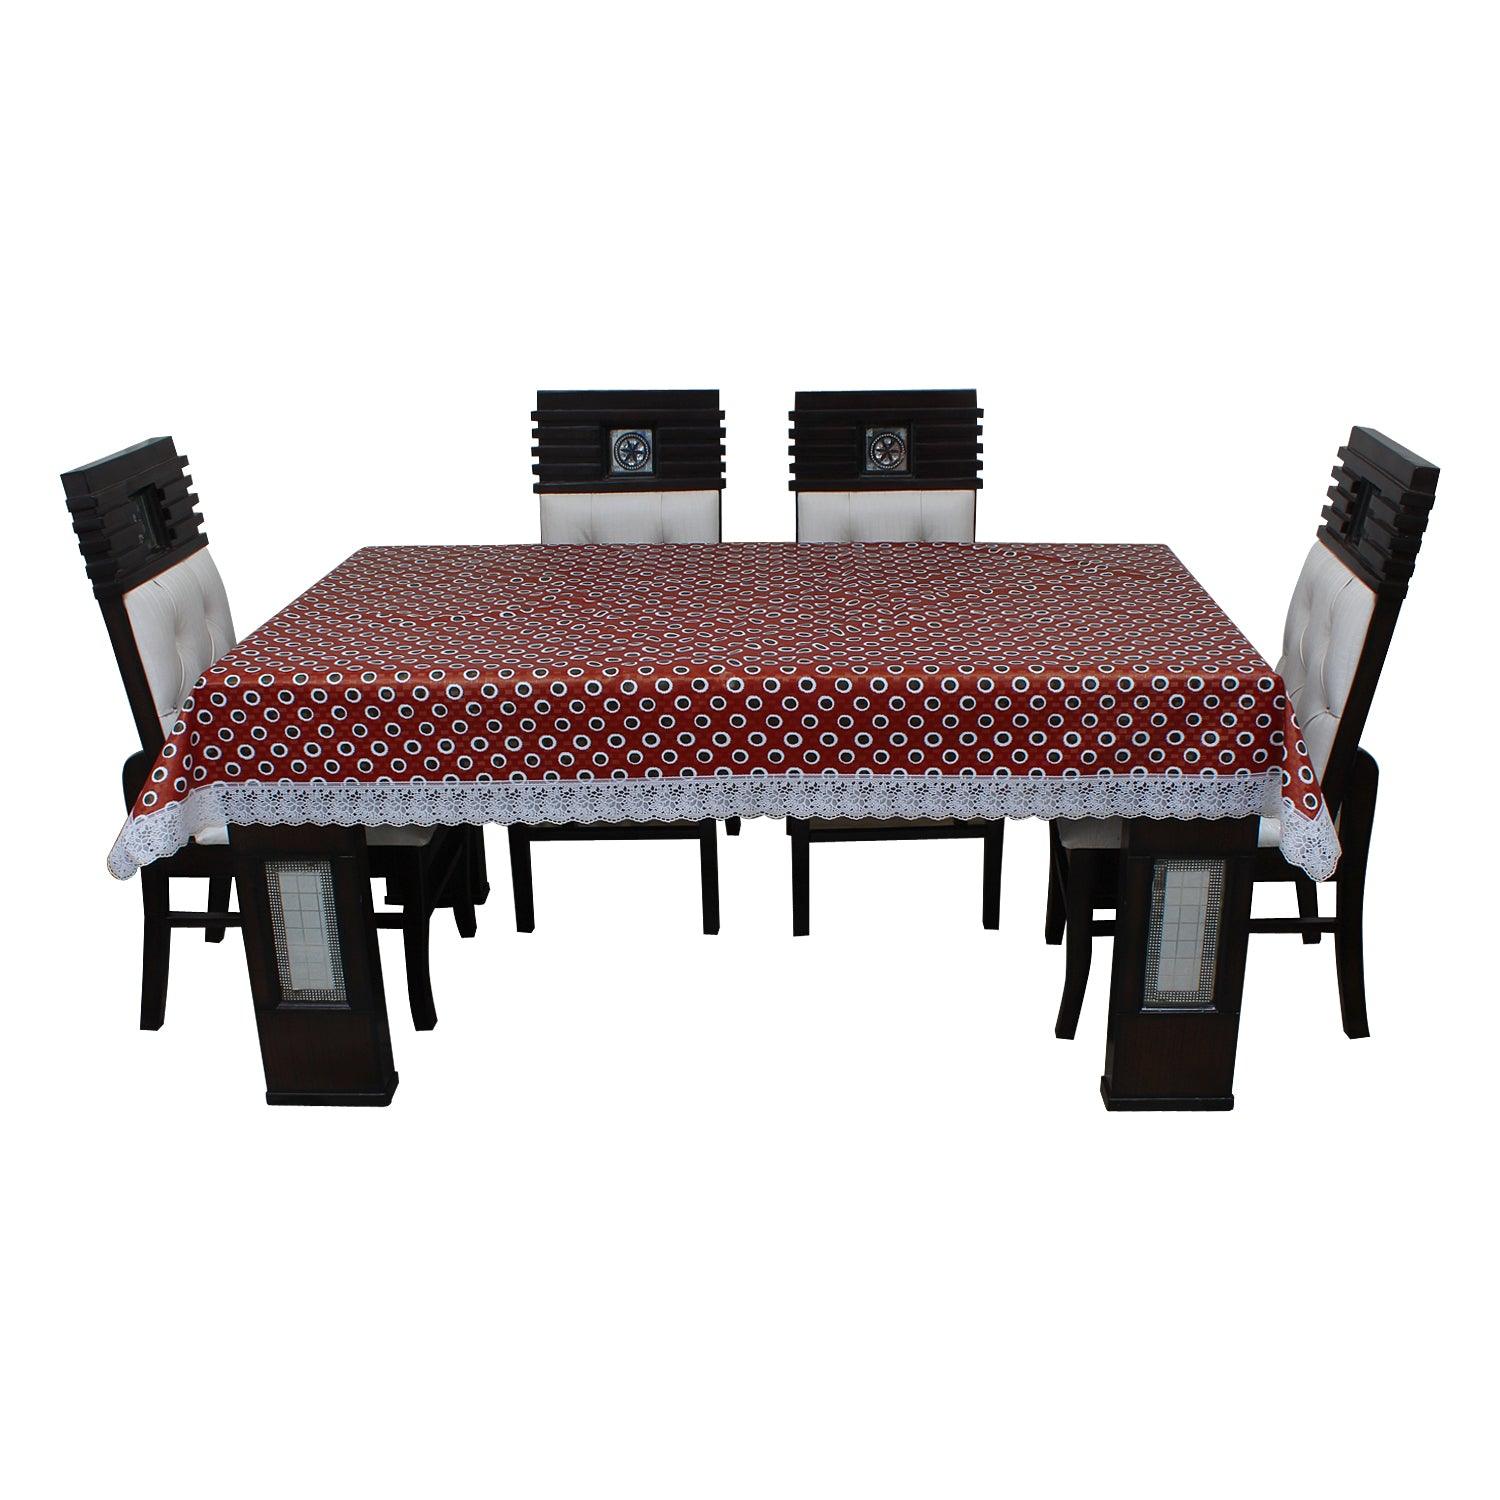 Waterproof and Dustproof Dining Table Cover, SA11 - Dream Care Furnishings Private Limited